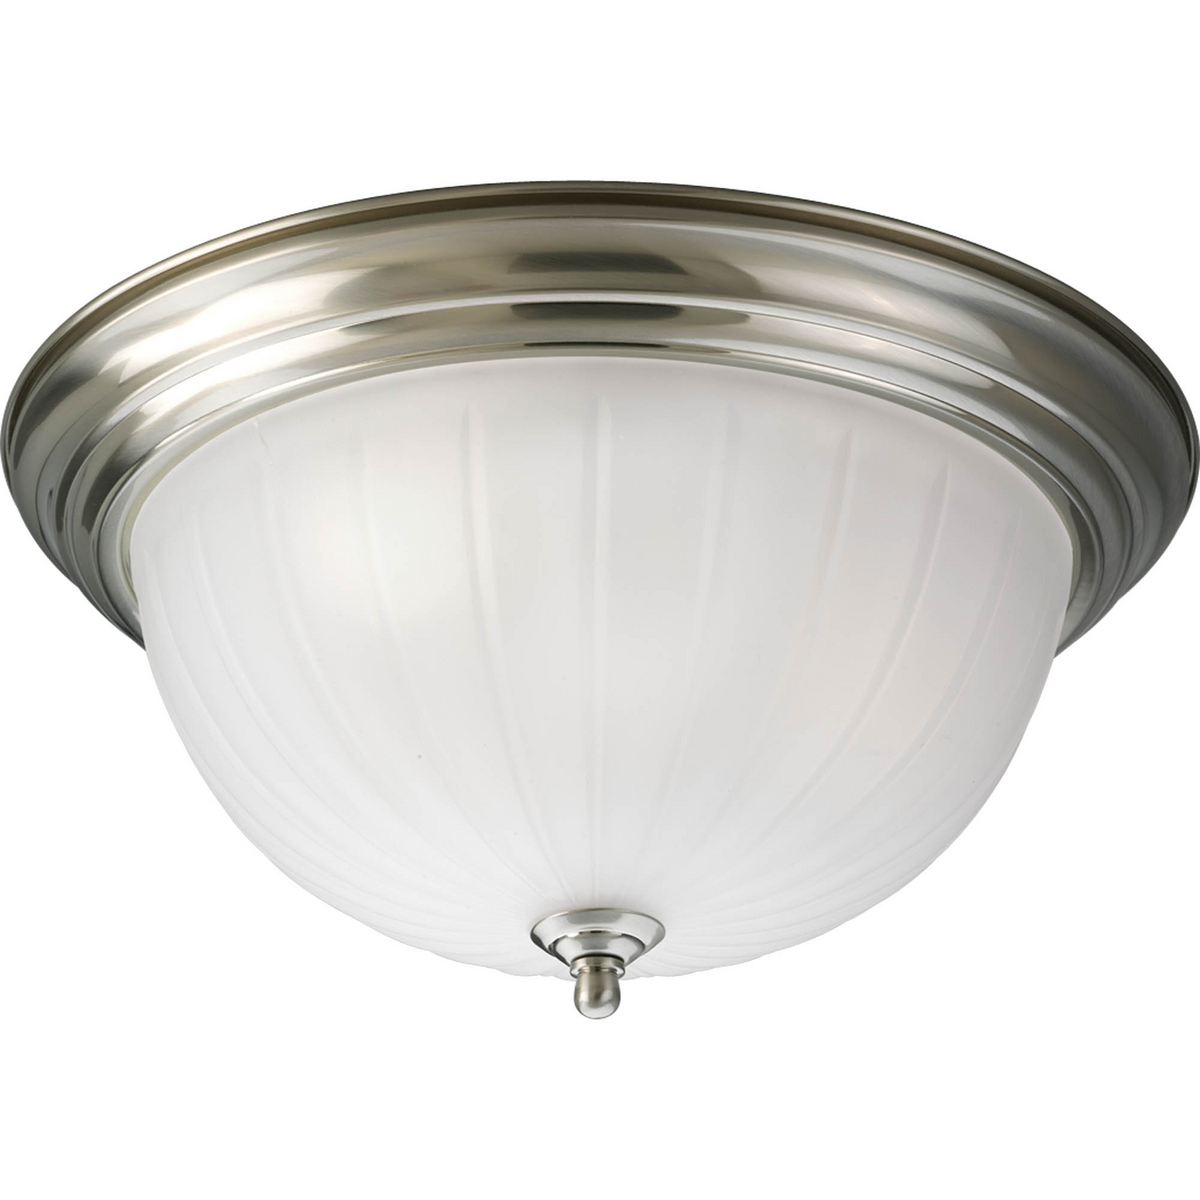 Three-light close-to-ceiling with etched ribbed melon glass with center lock up in Brushed Nickel finish.